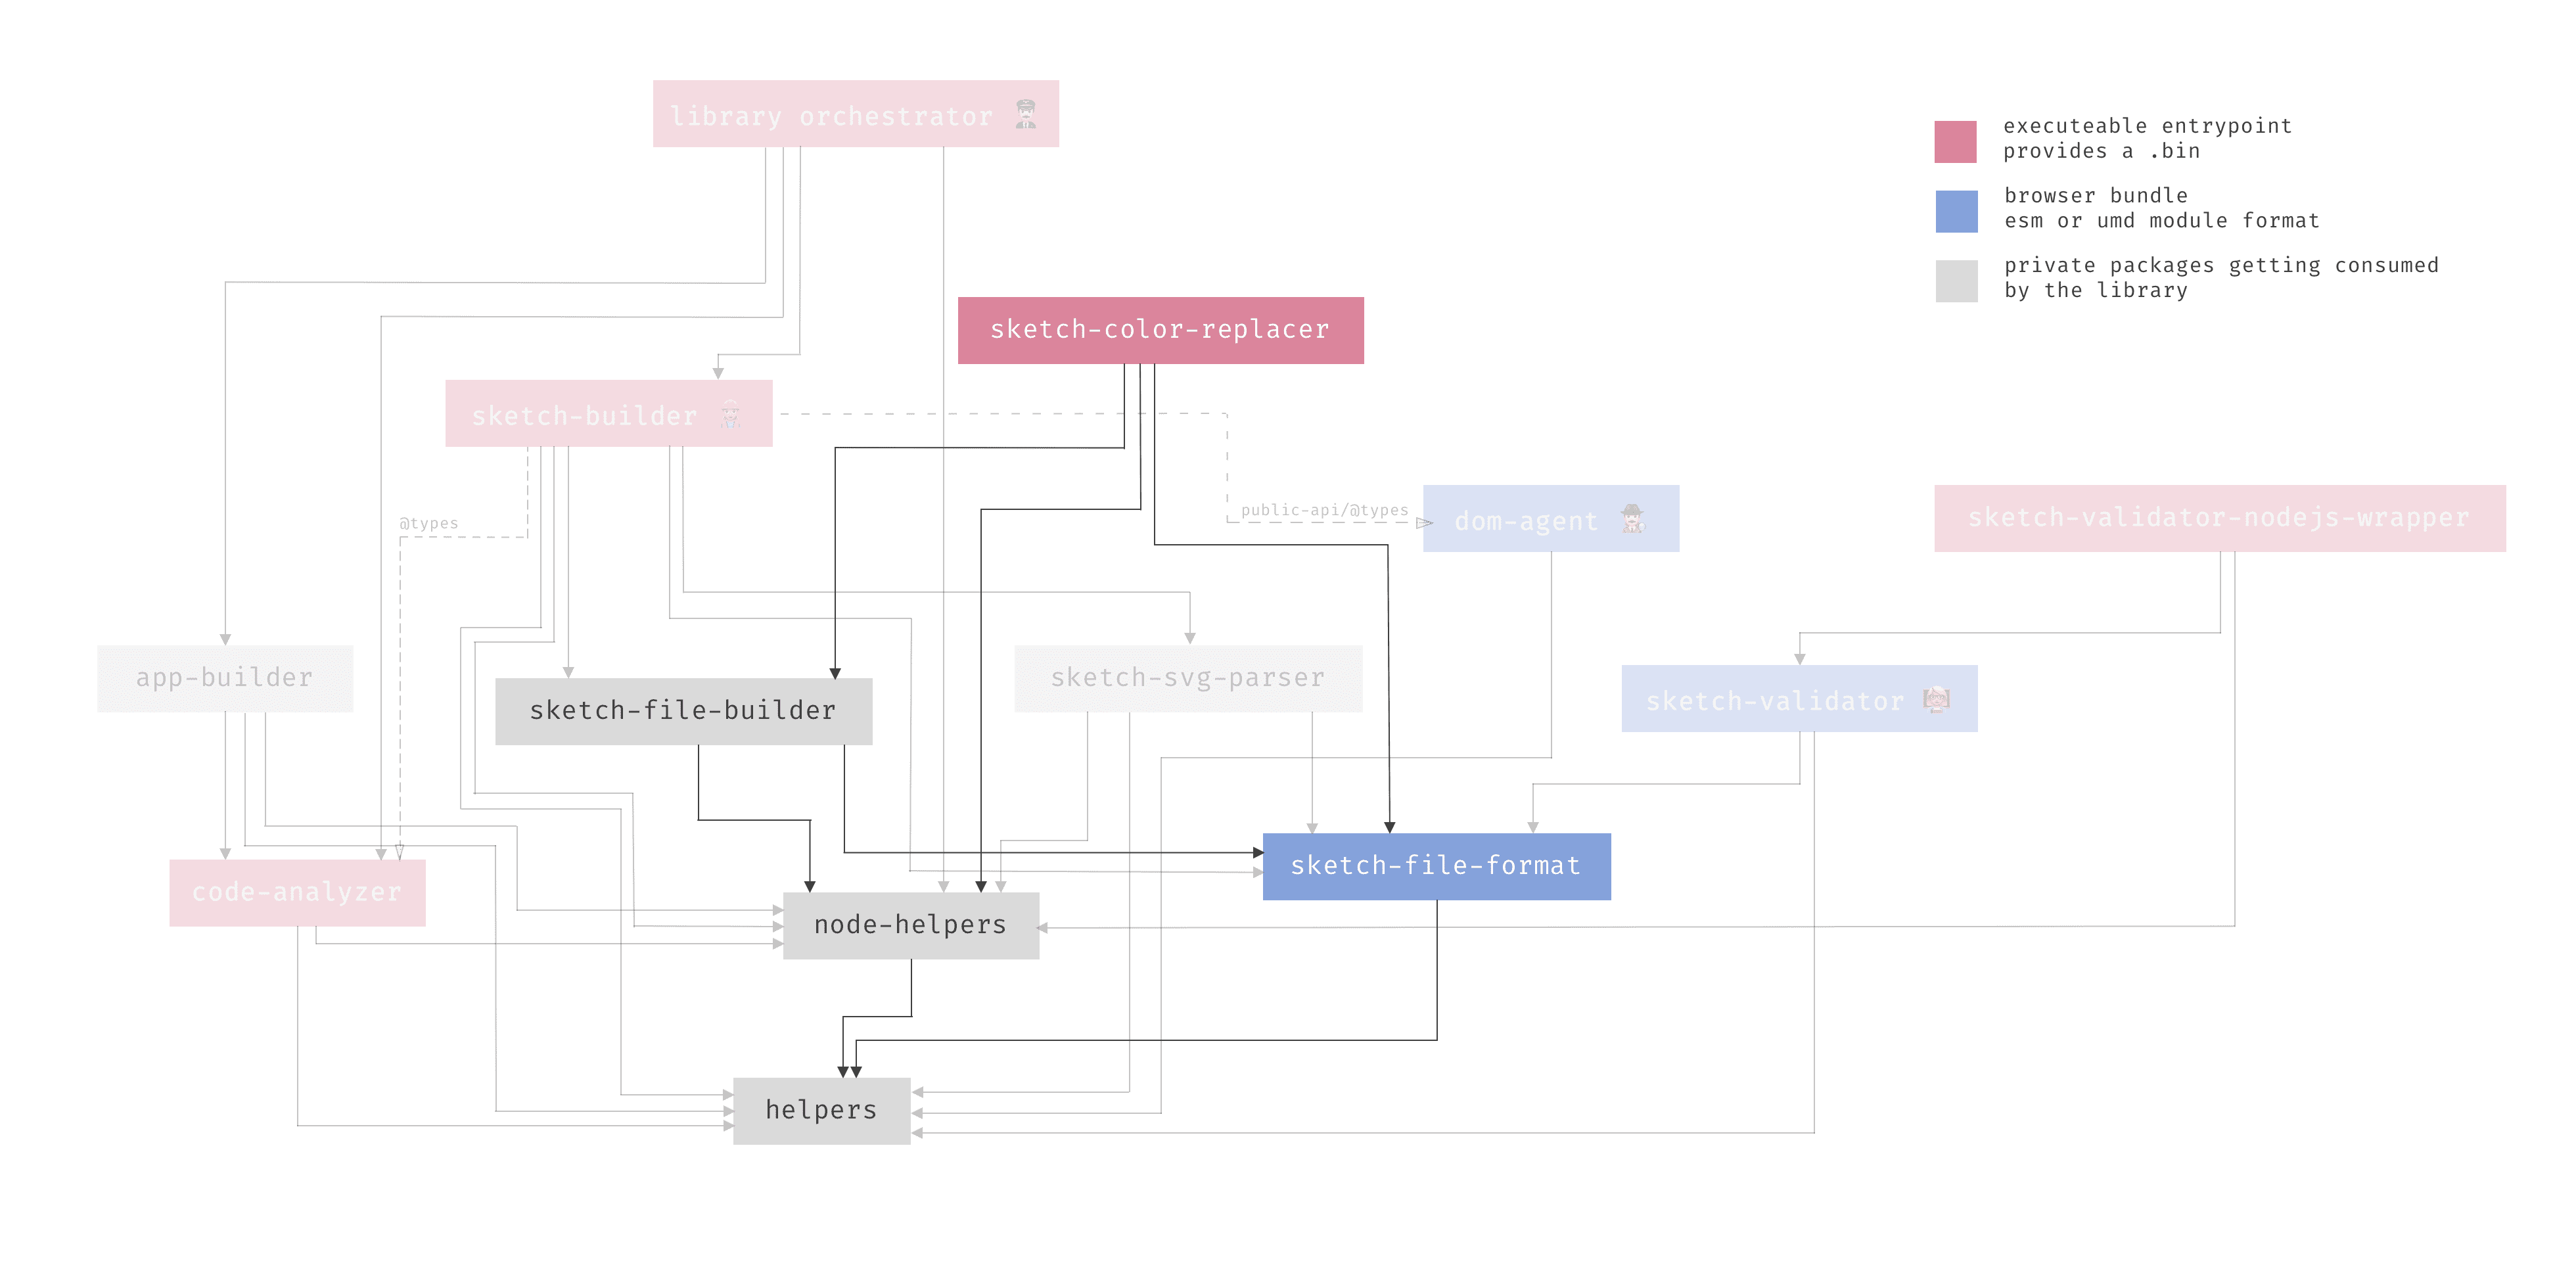 Dependency graph of the sketchmine sketch-color-replacer